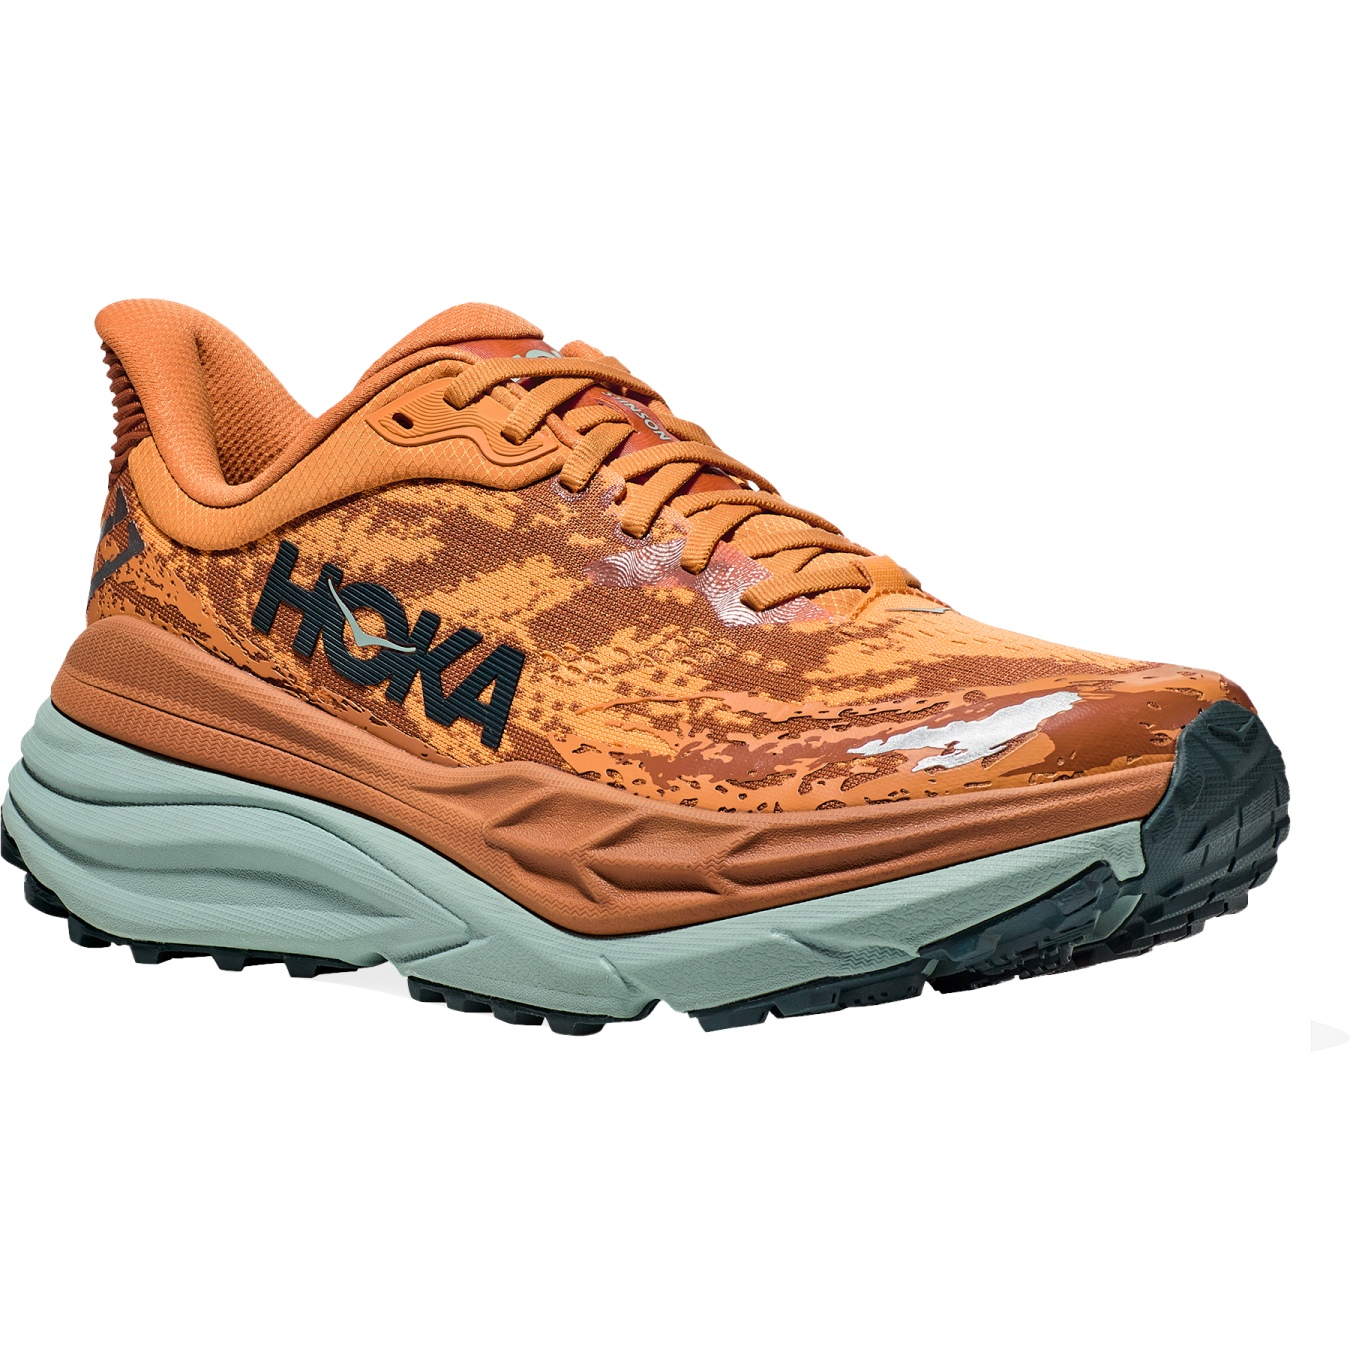 Picture of Hoka Stinson 7 Running Shoes - amber haze / amber brown